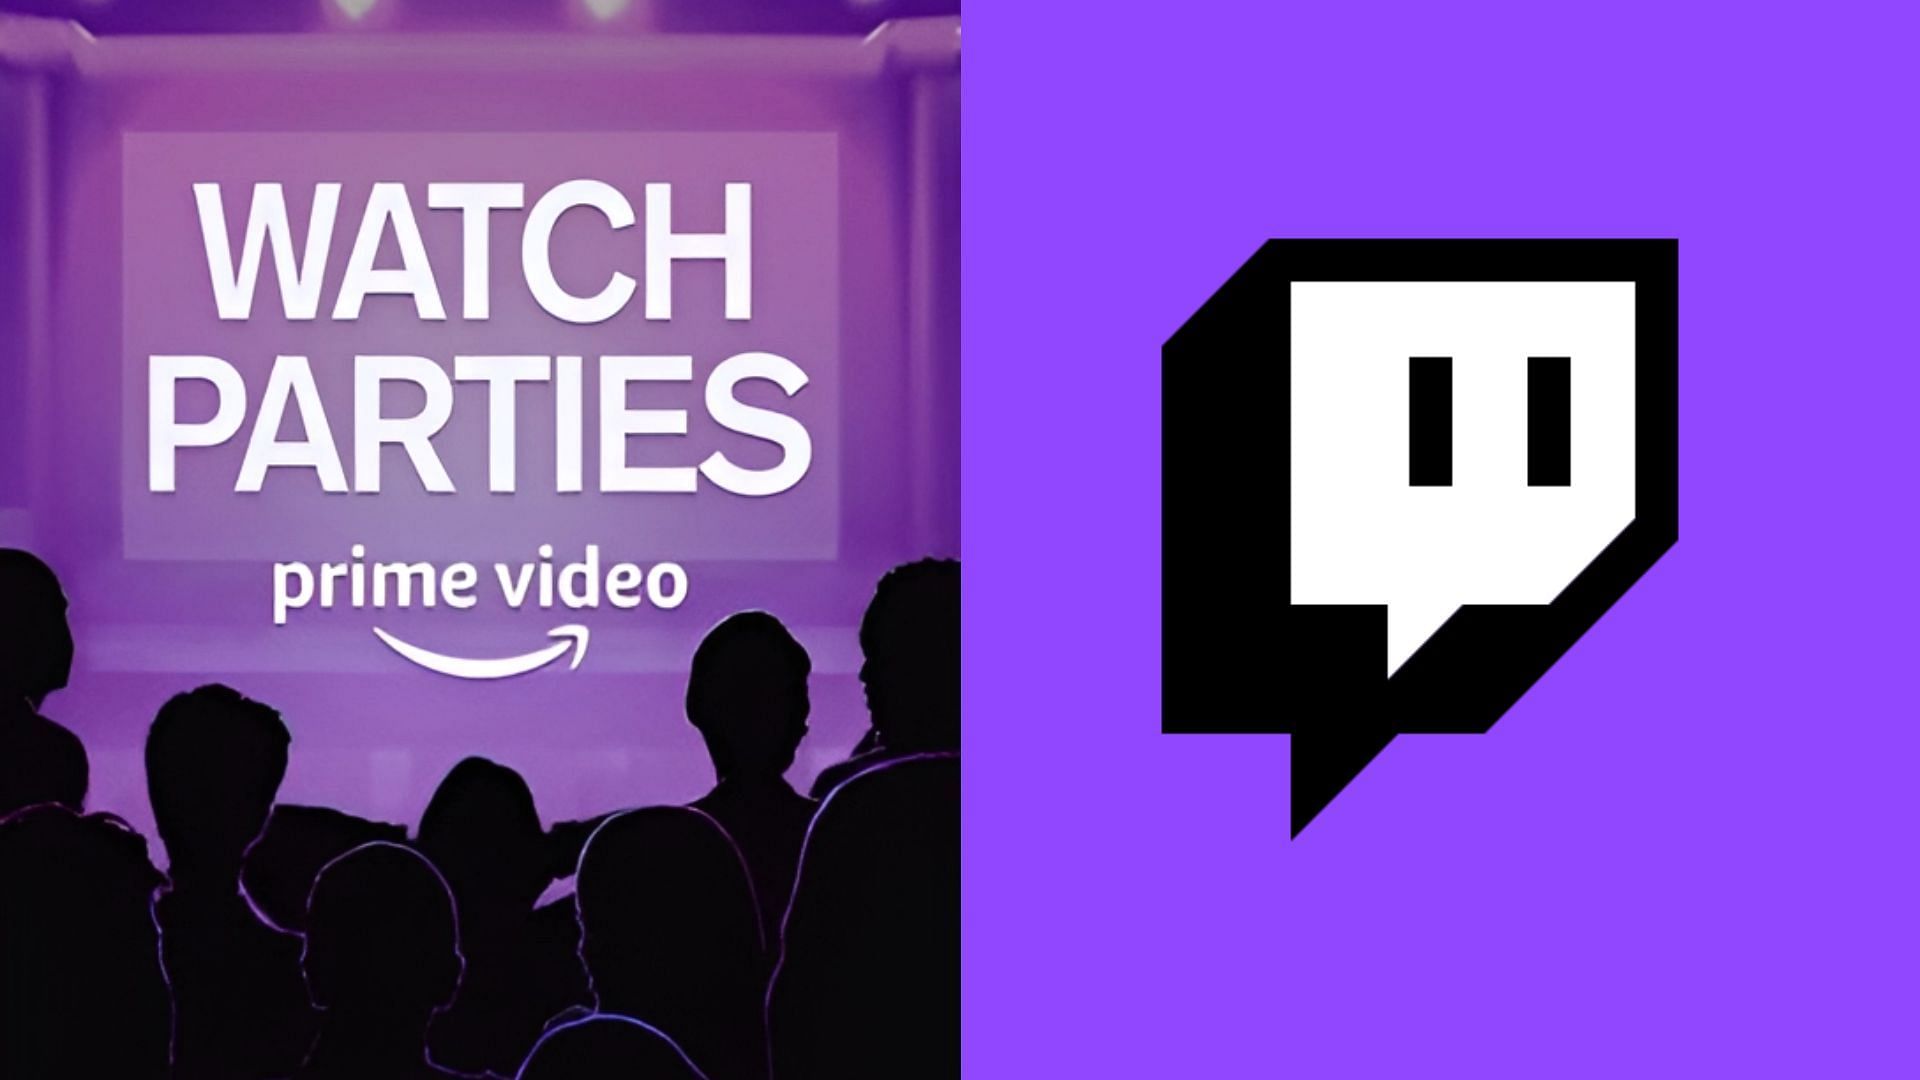 Say goodbye to Twitch Watch Parties (Image via Twitch.tv)